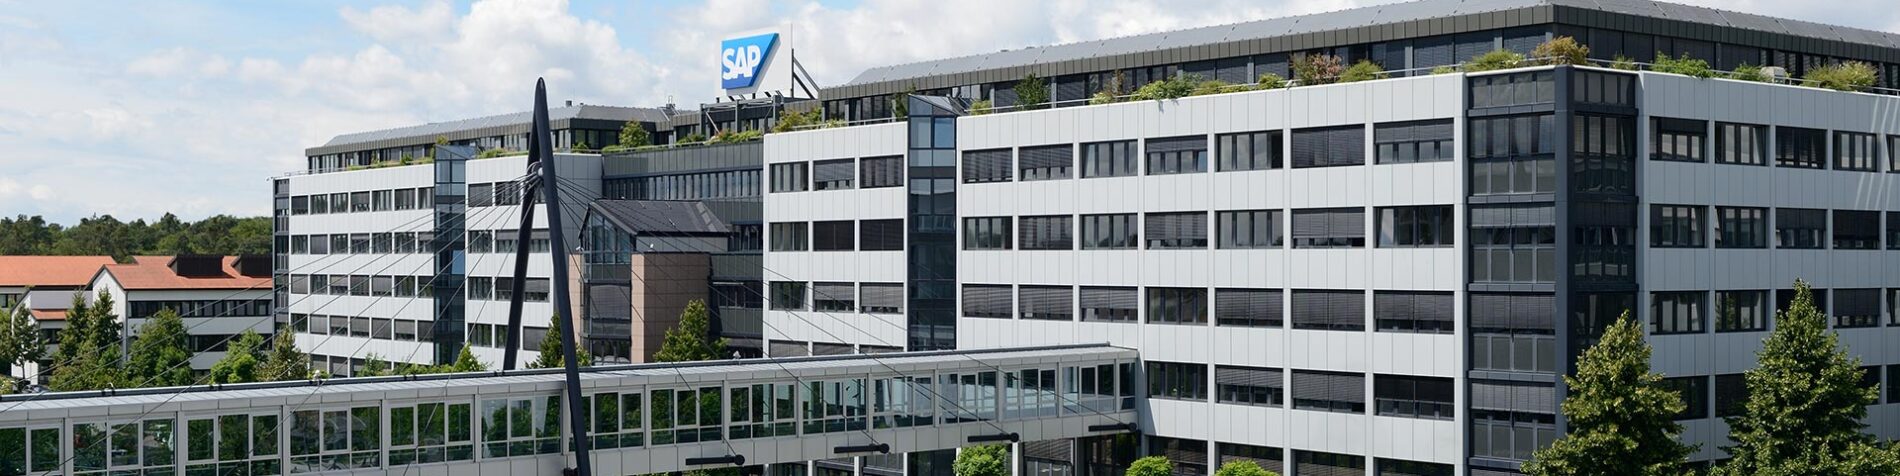 SAP to Announce Fourth Quarter 2015 Earnings